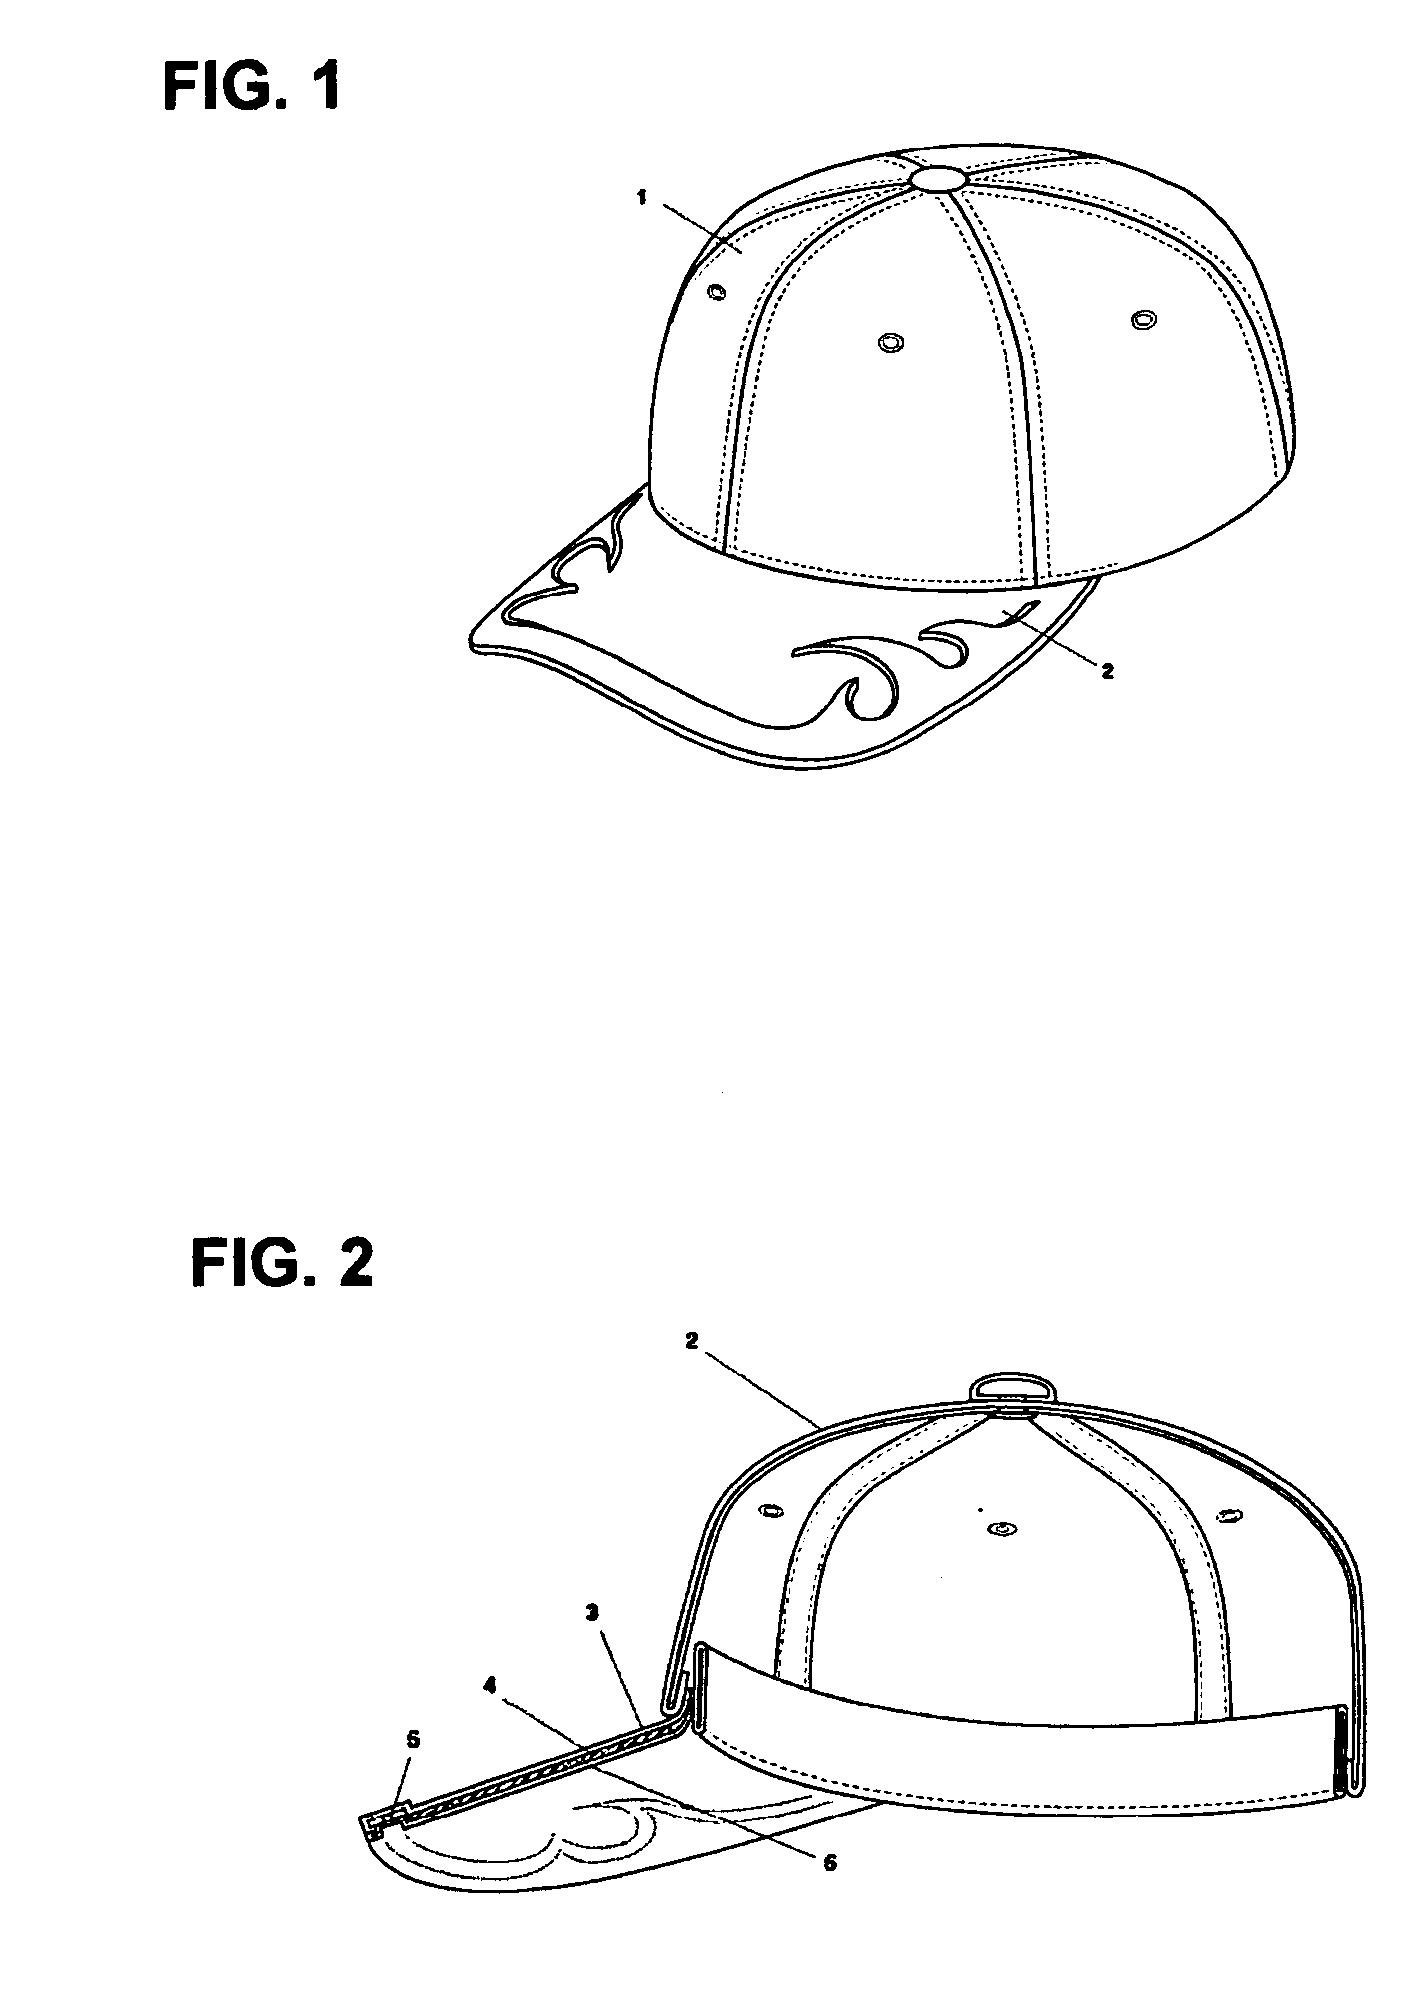 Headwear capable of making all kinds of shapes